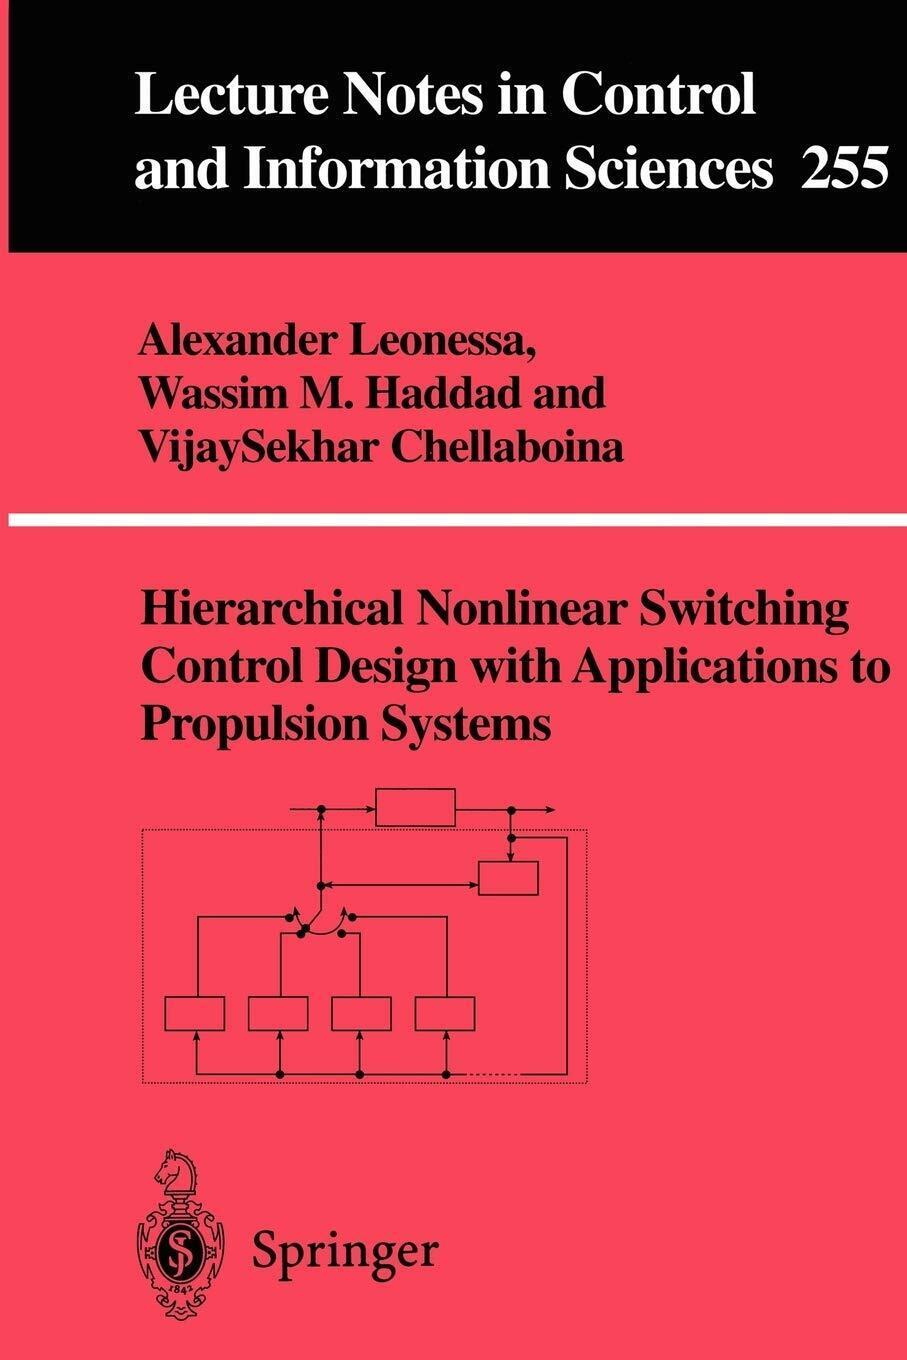 Hierarchical Nonlinear Switching Control Design with Applications to Propulsion  libro usato